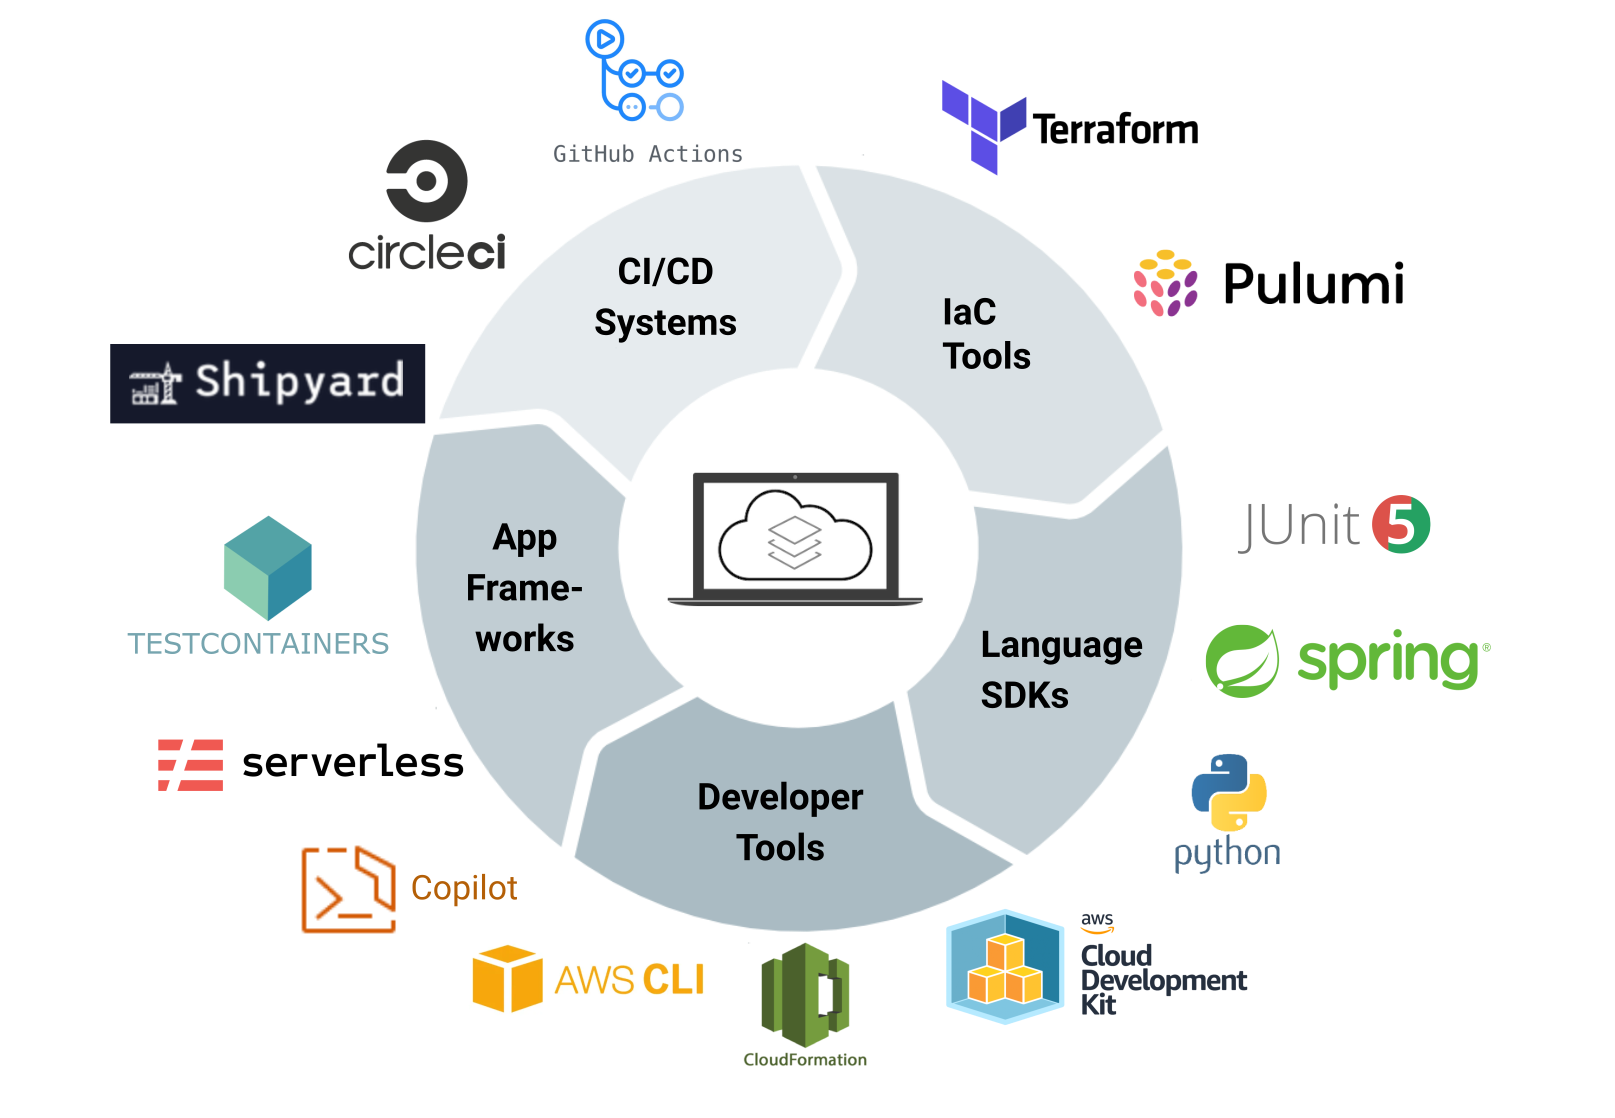 LocalStack supports various integrations